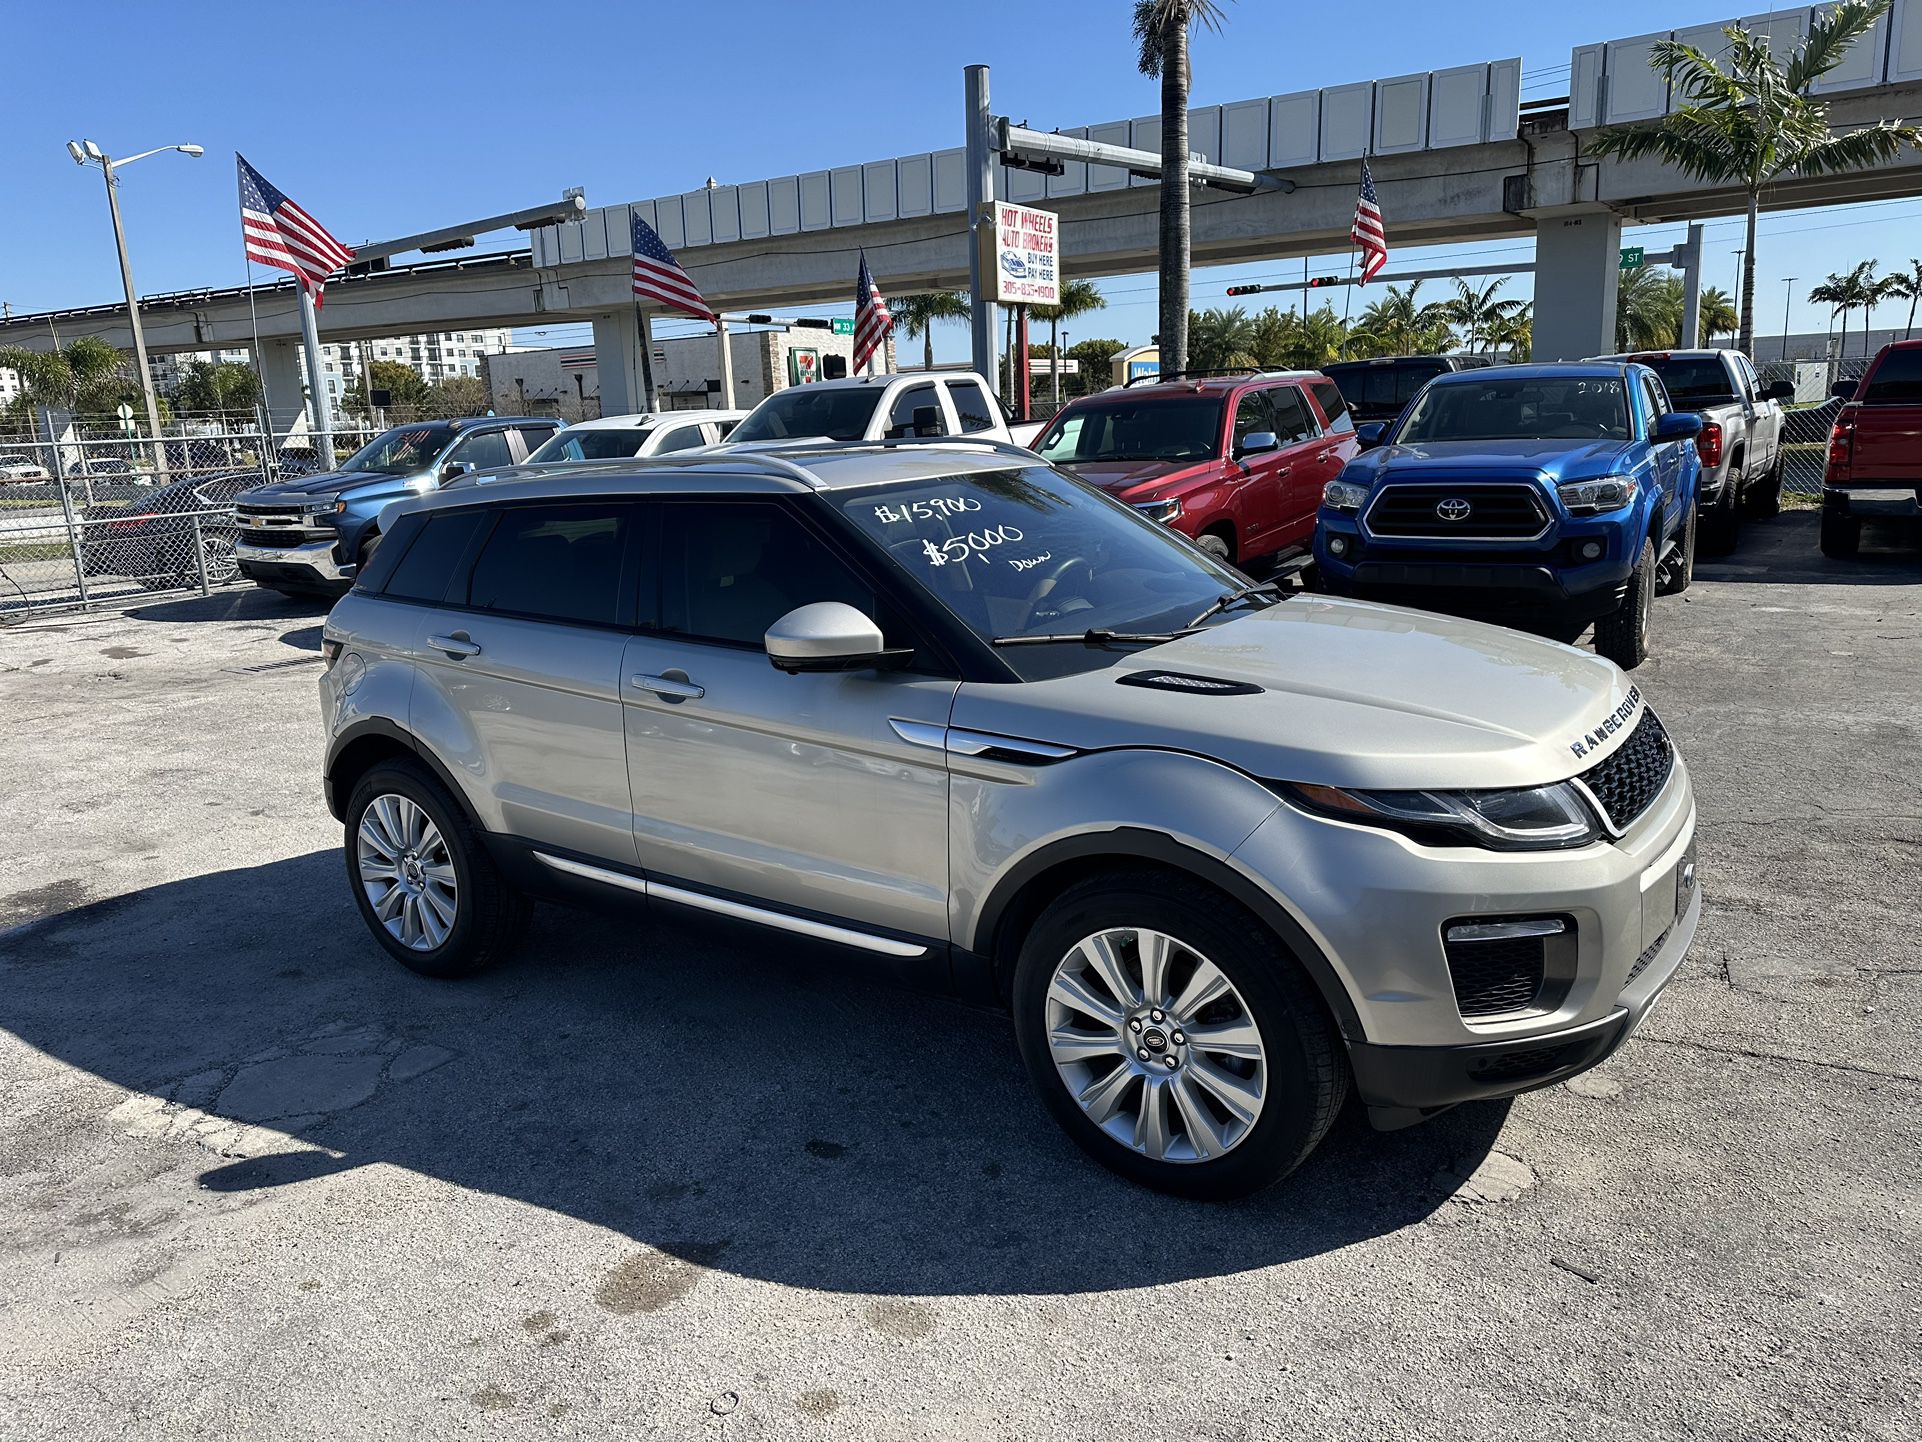 used 2017 Land Rover evoque - front view 3